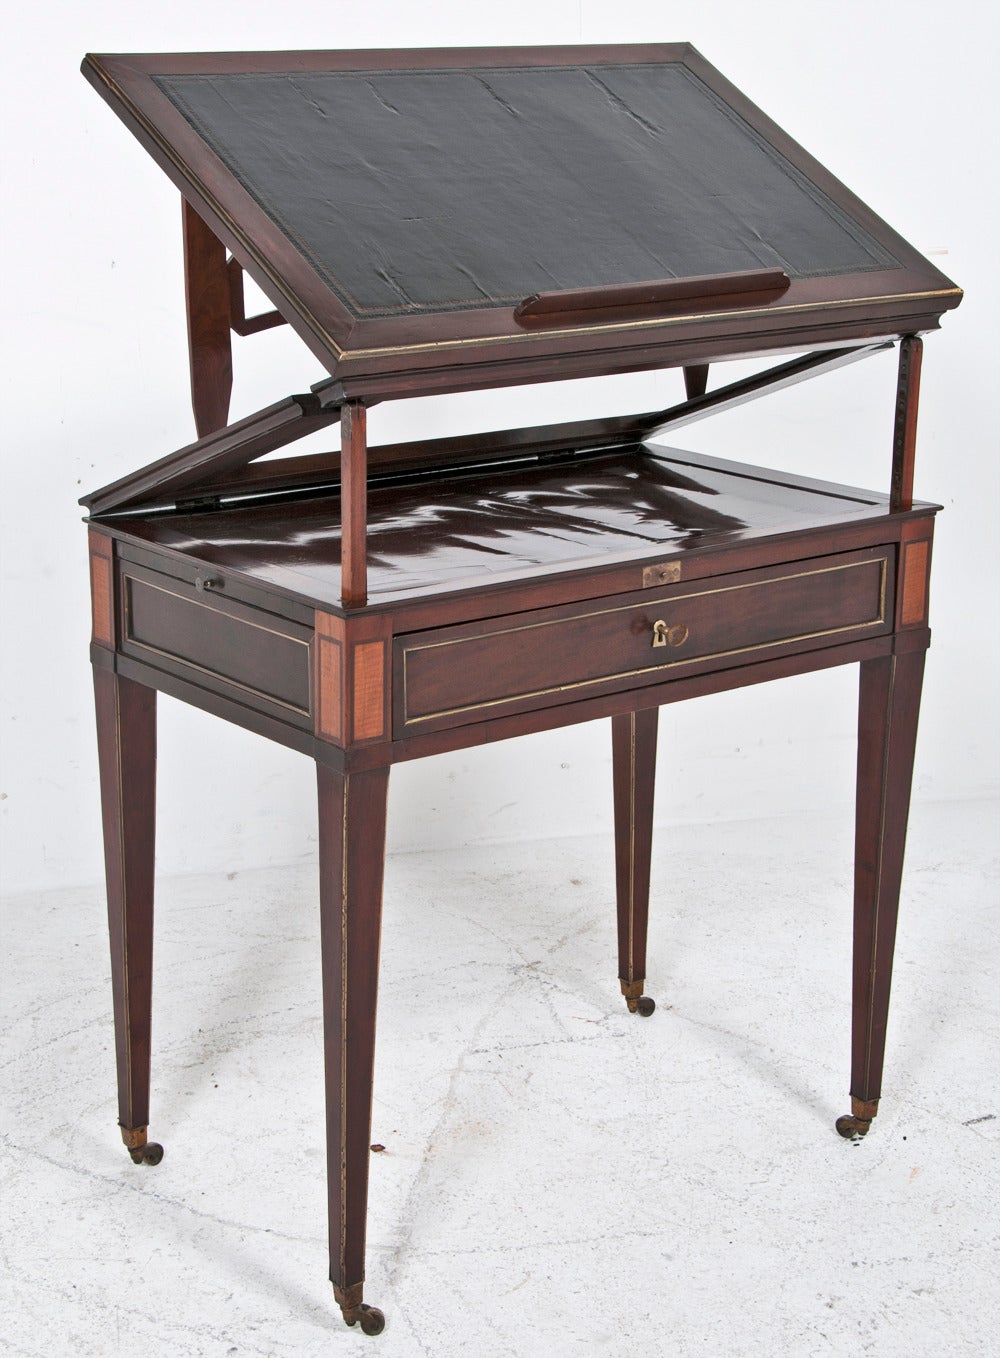 This elegant small and useful architects desk was made in the area around the Baltic Sea early in the 19th century. The top is inlaid with leather. The case mostly mahogany but with satinwood and brass inlays. The top raises and tilts depending if